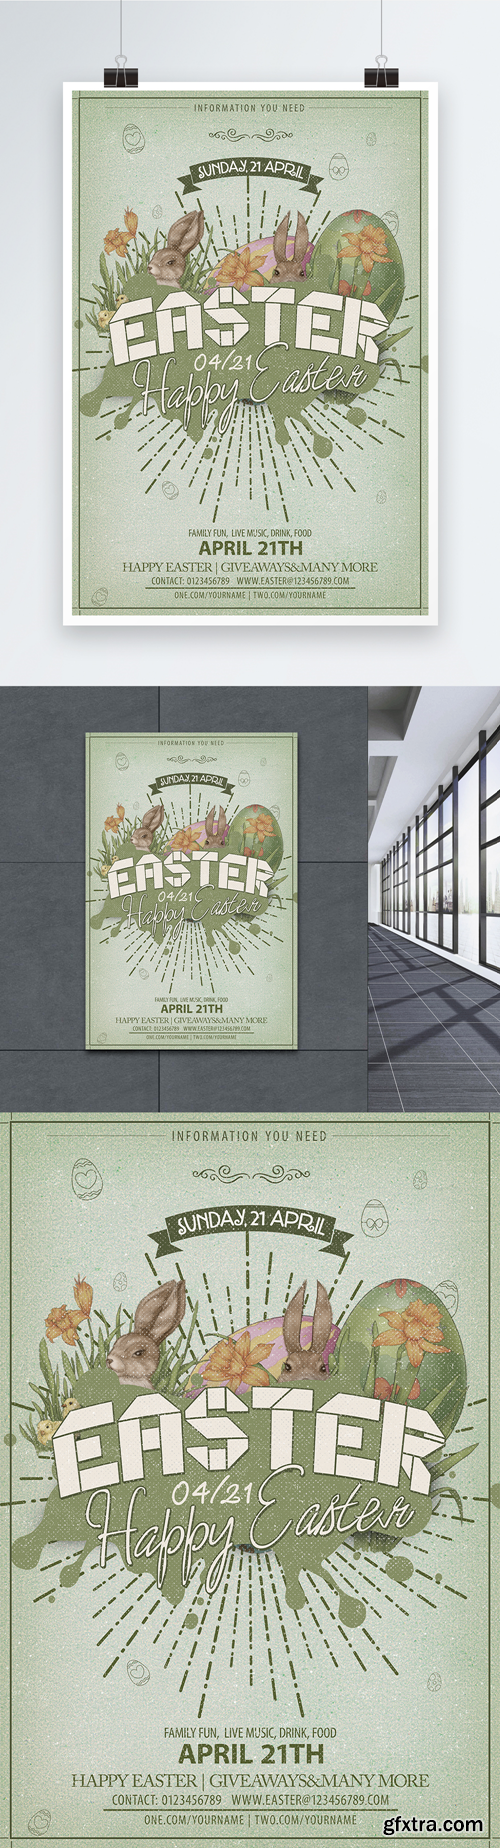 poster design of easter free promotion activities for retro cart